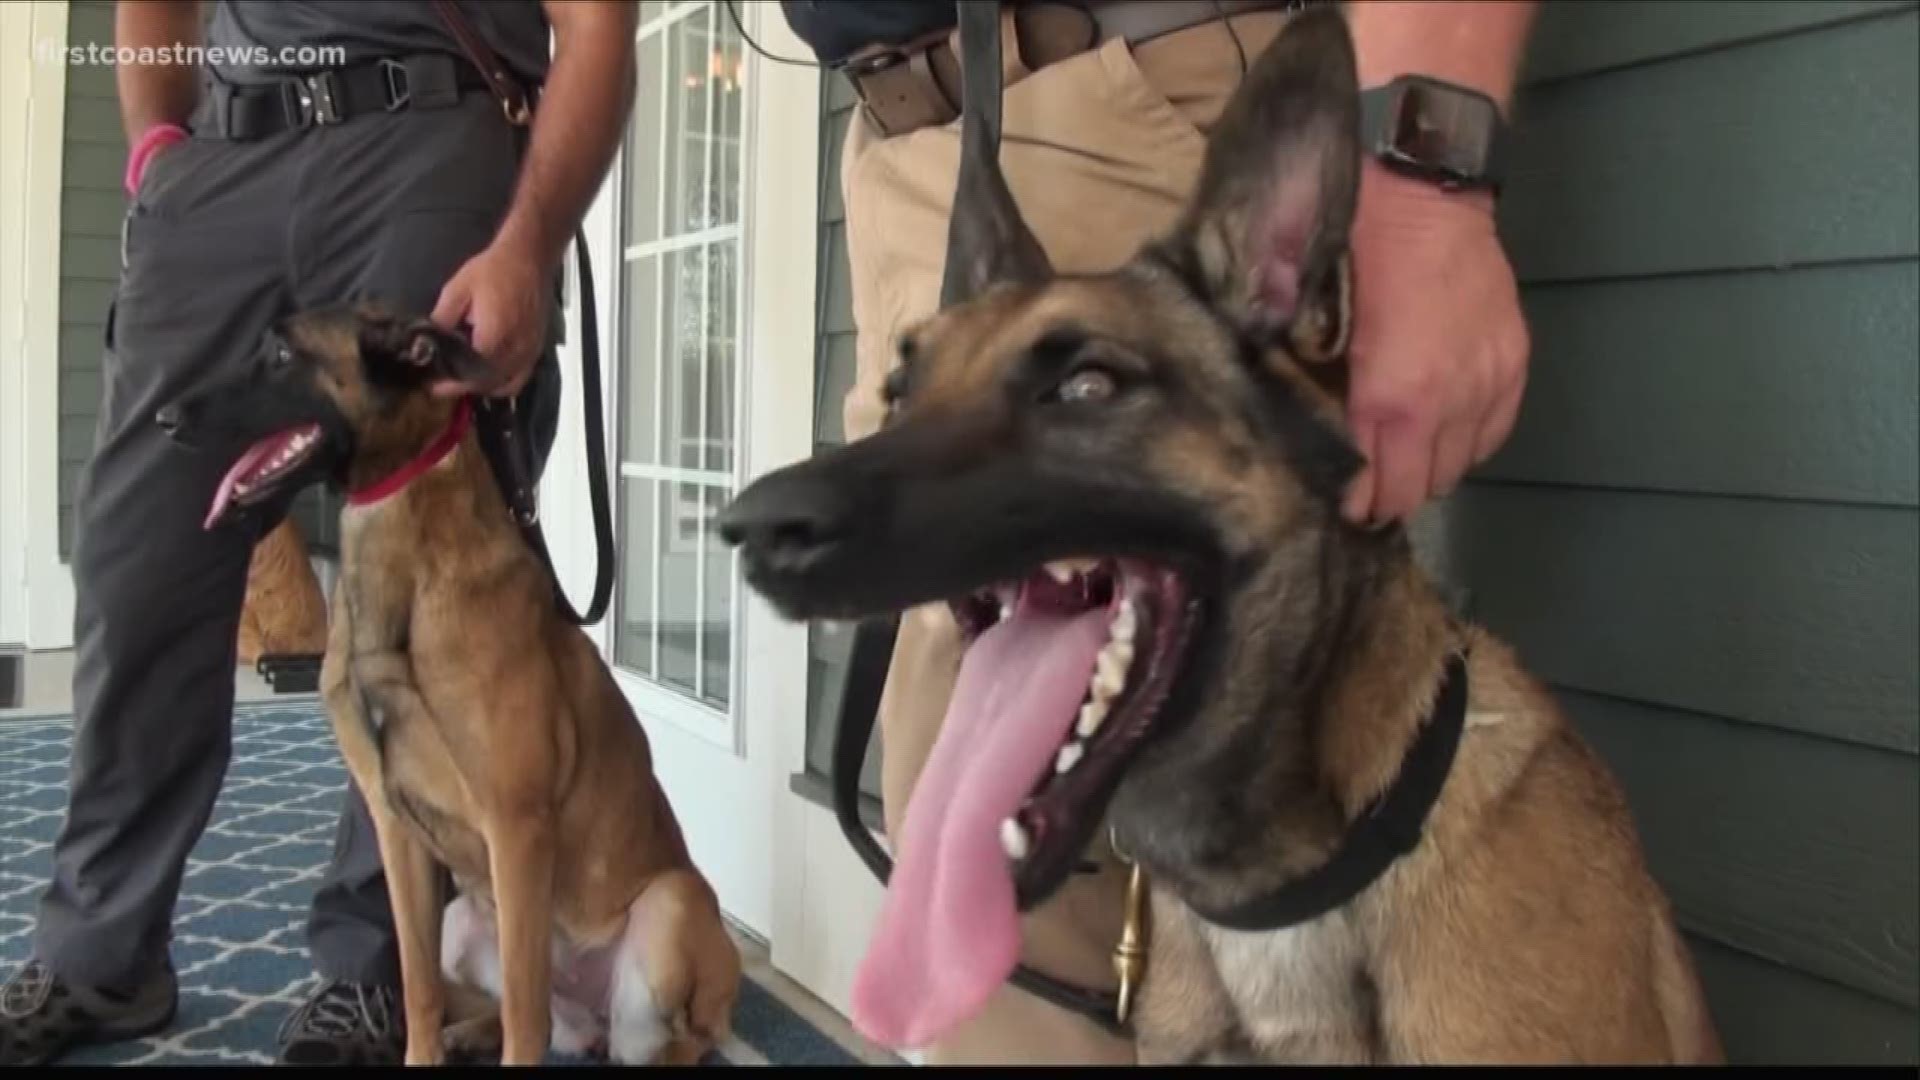 It's hard to even believe this video is real.  But now K9s for Warriors is training this breed for veteran service dogs.